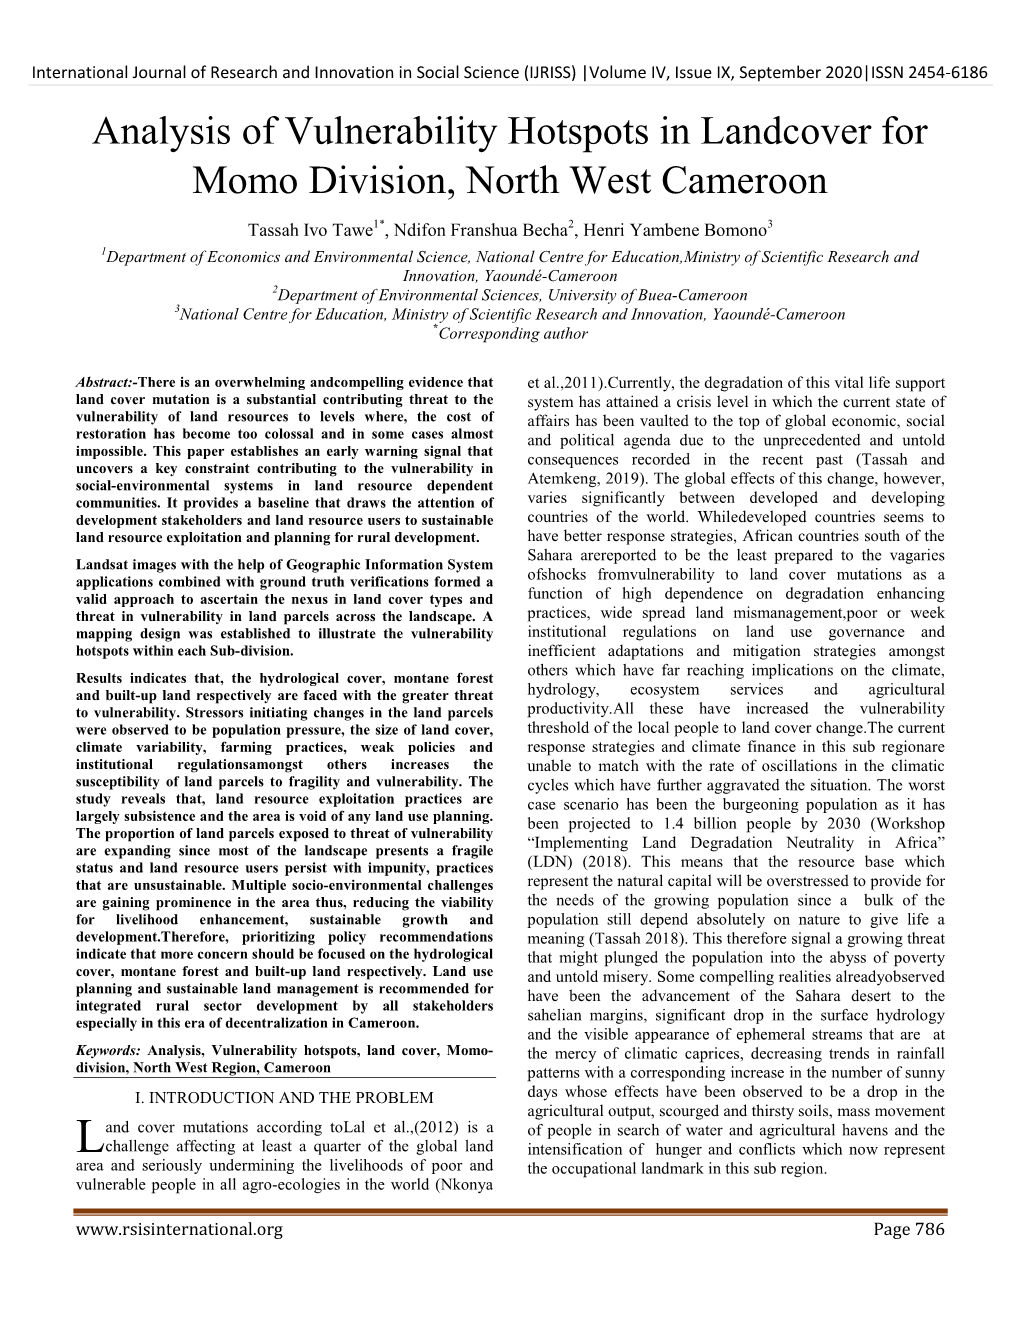 Analysis of Vulnerability Hotspots in Landcover for Momo Division, North West Cameroon